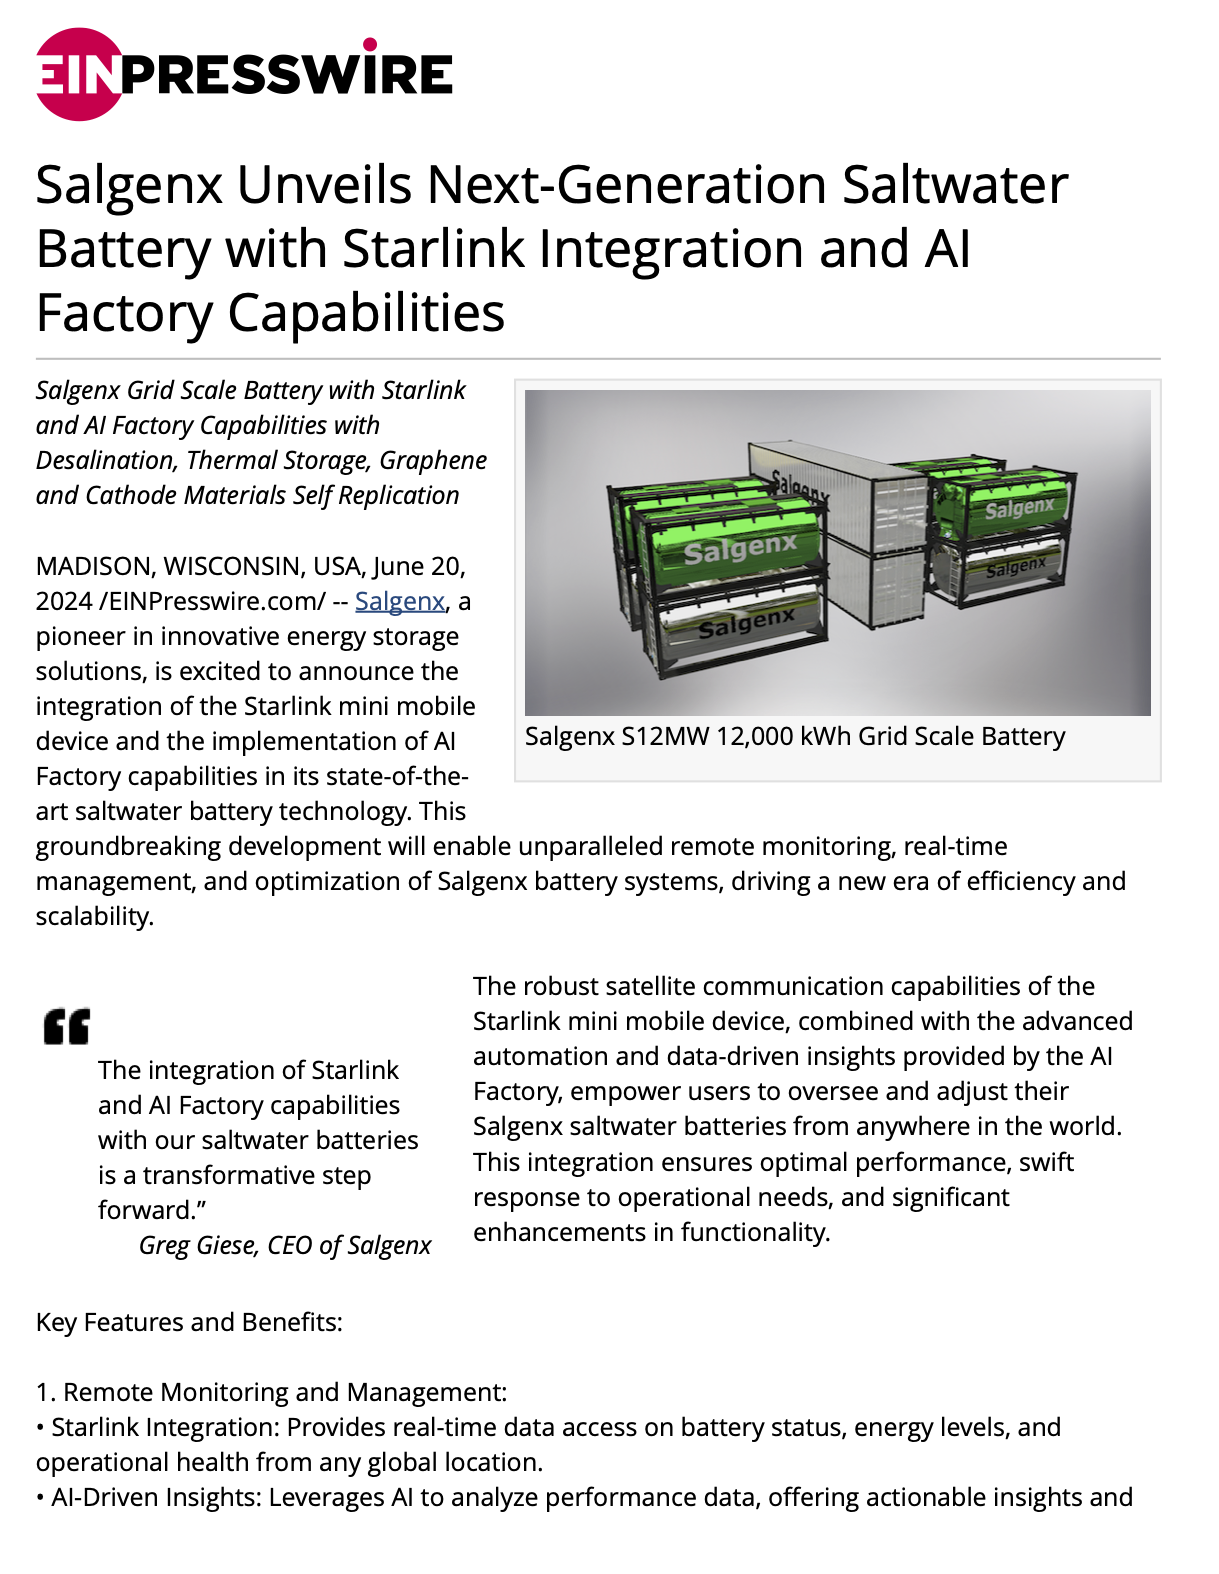 Salgenx Unveils Next-Generation Saltwater Battery with Starlink Integration and AI Factory Capabilities